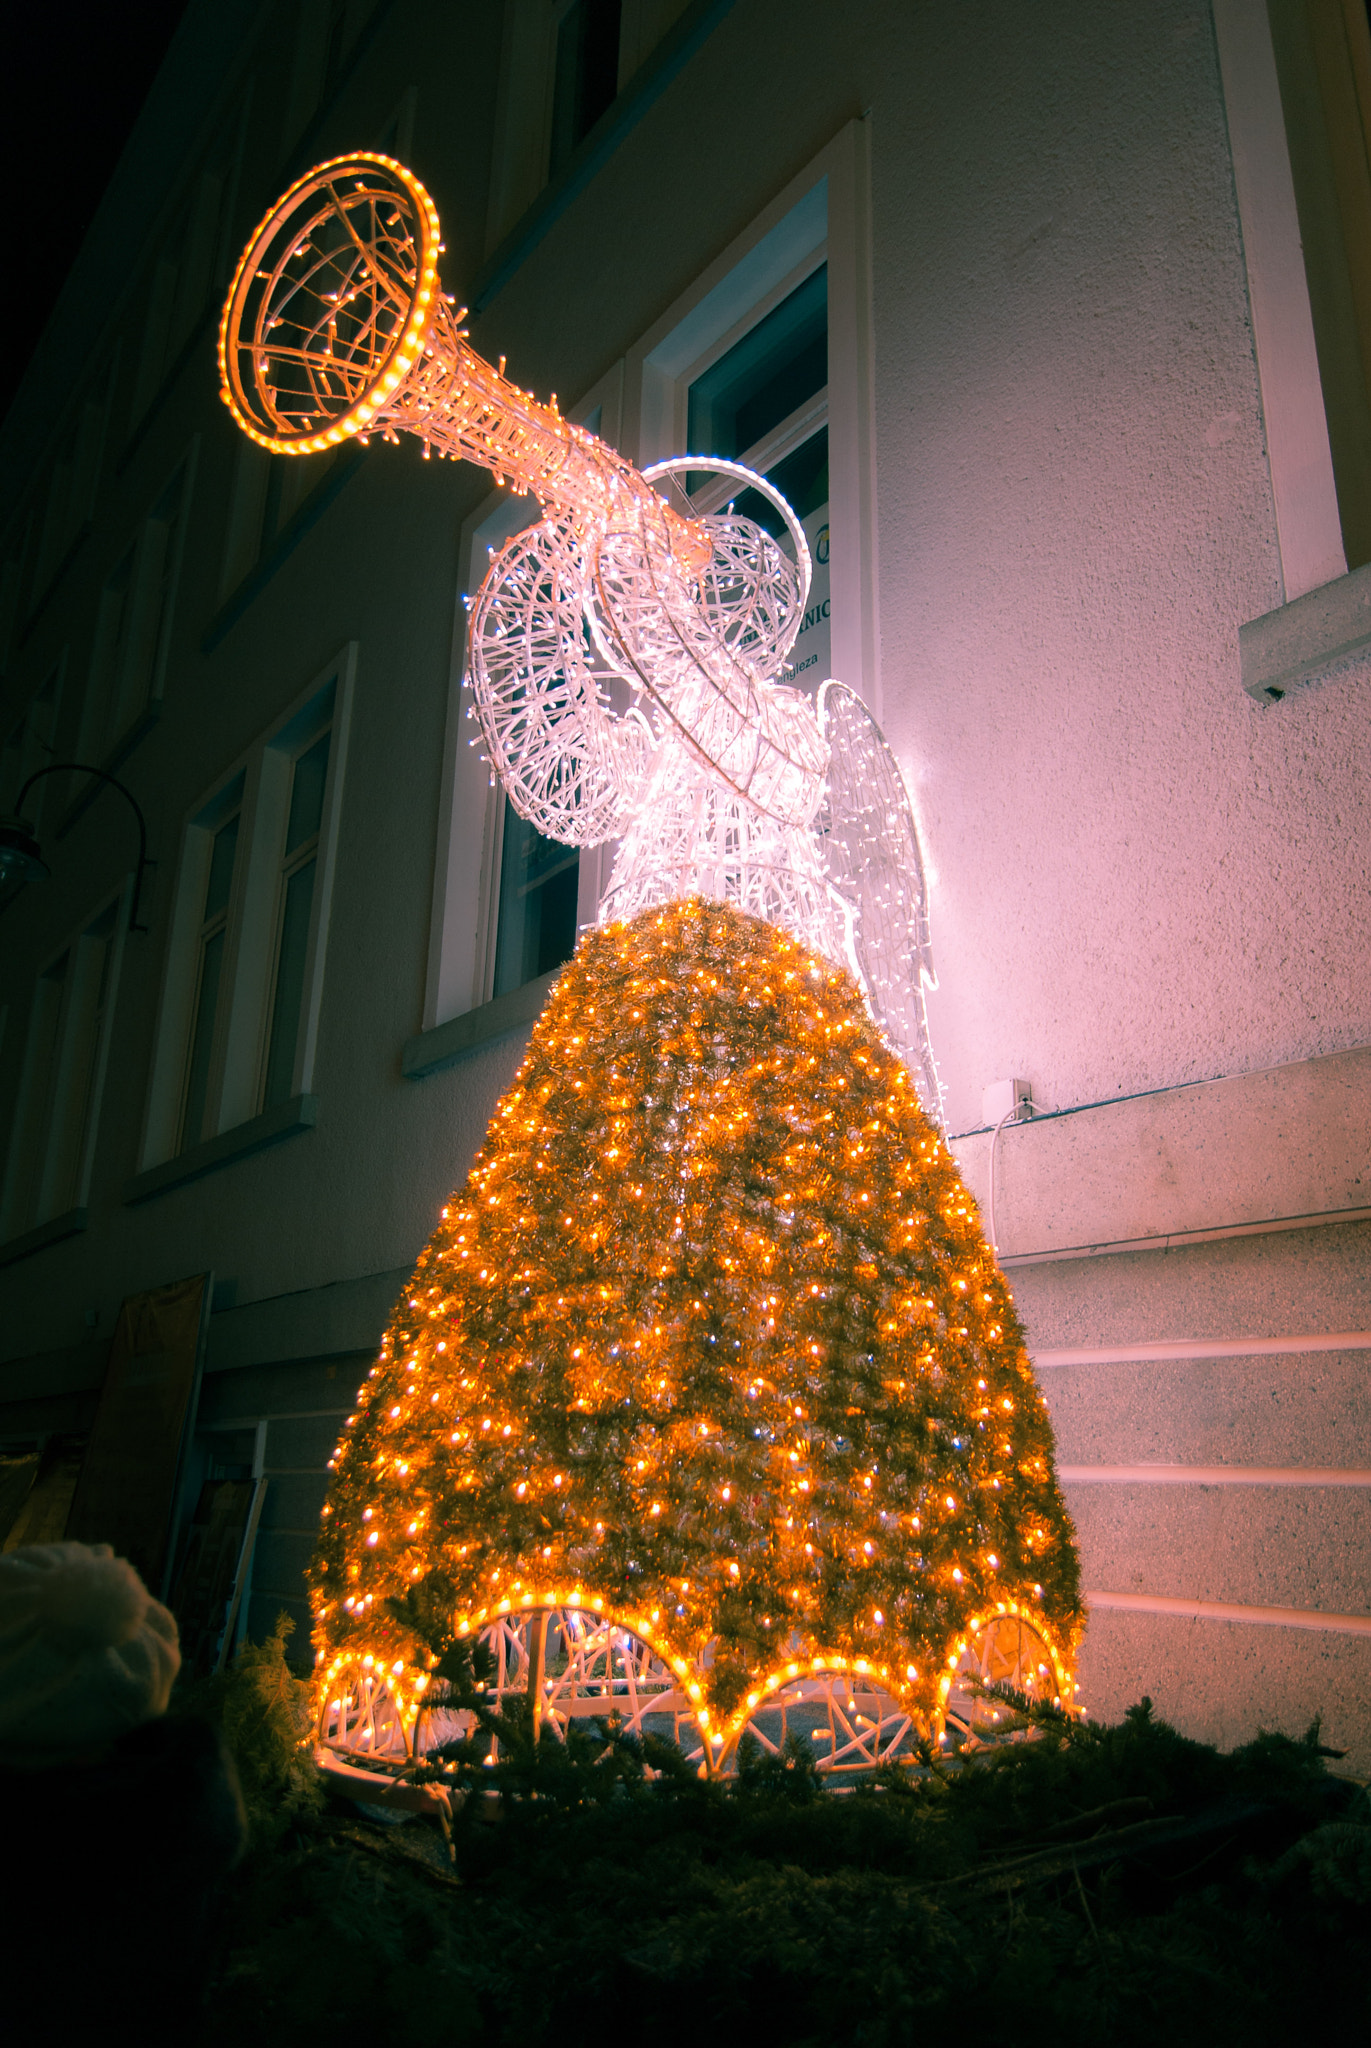 Sony Alpha DSLR-A200 + Tamron SP AF 17-50mm F2.8 XR Di II LD Aspherical (IF) sample photo. Christmas angel photography